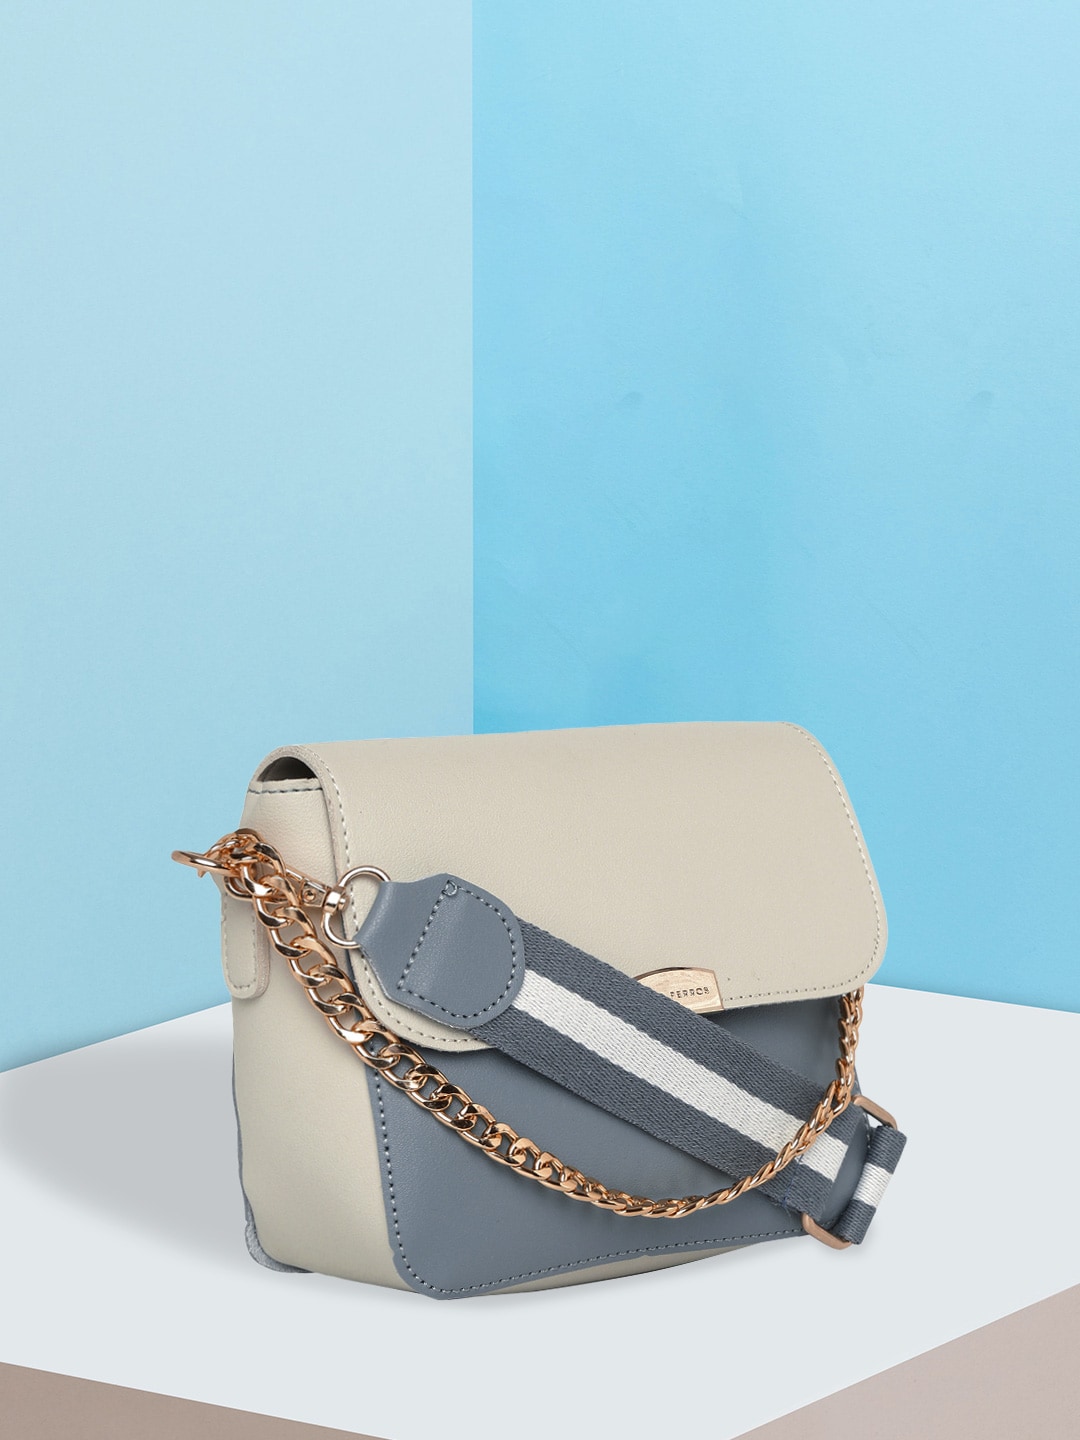 Lino Perros Blue & Off-White Colourblocked Handheld Bag Price in India